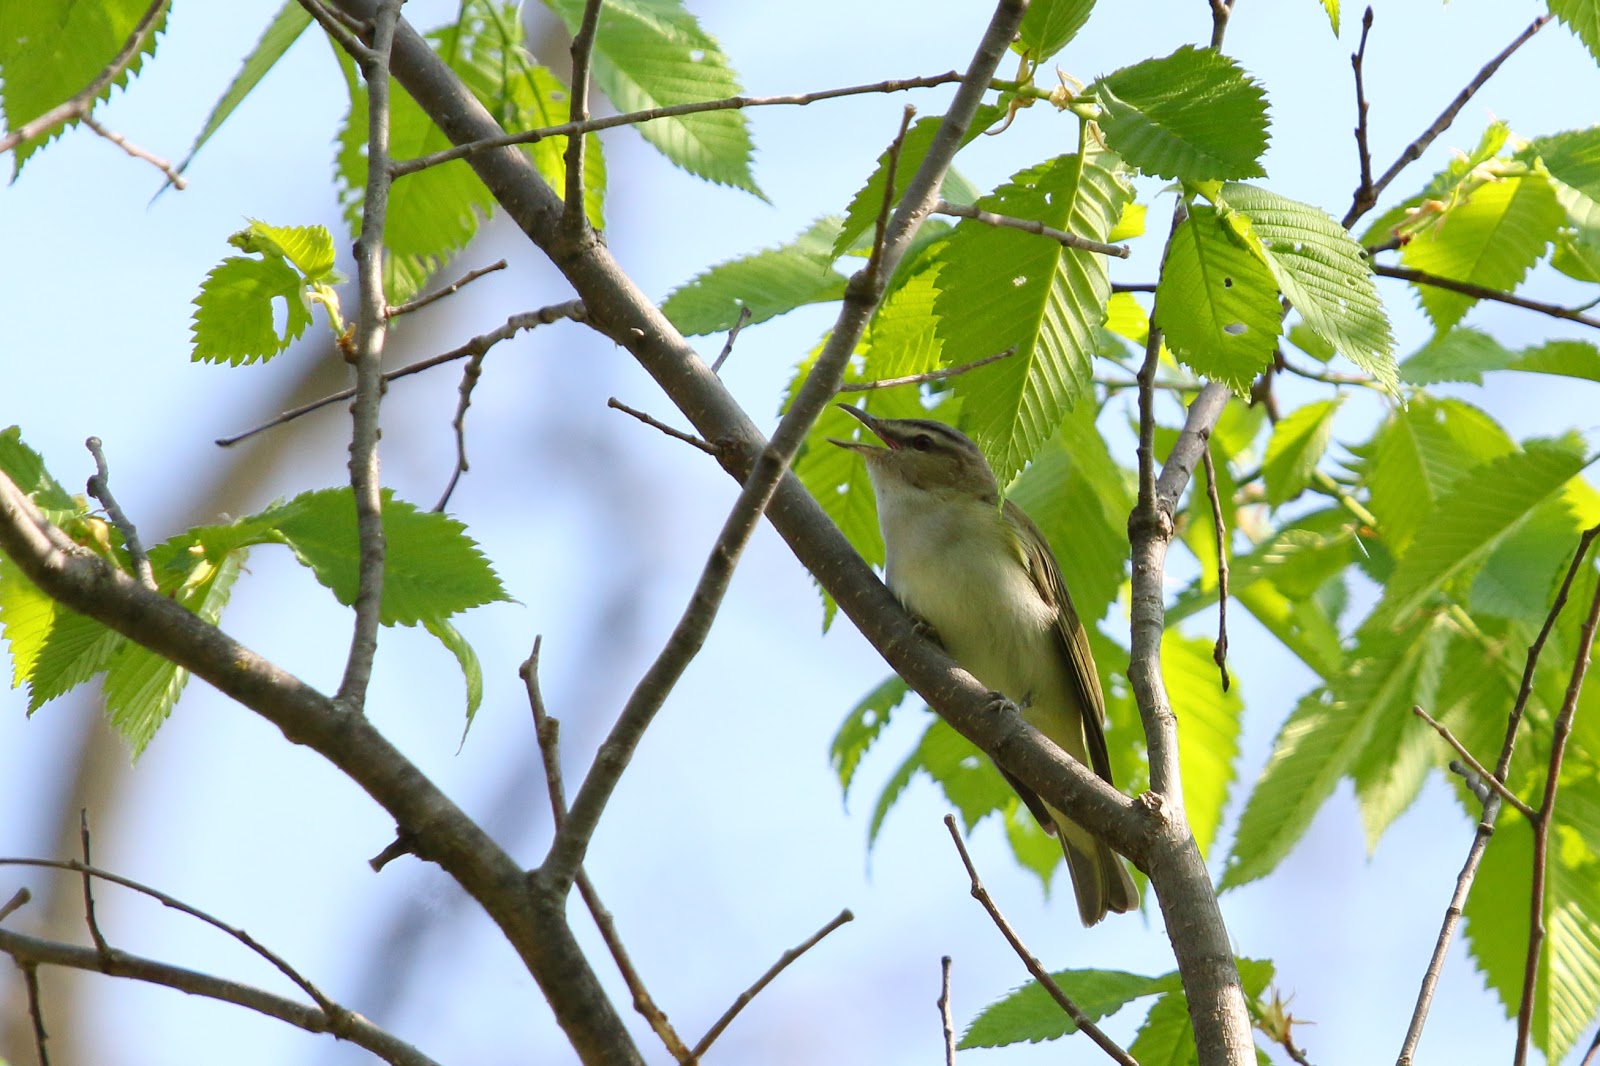 Red-eyed Vireo image - click on image for sound